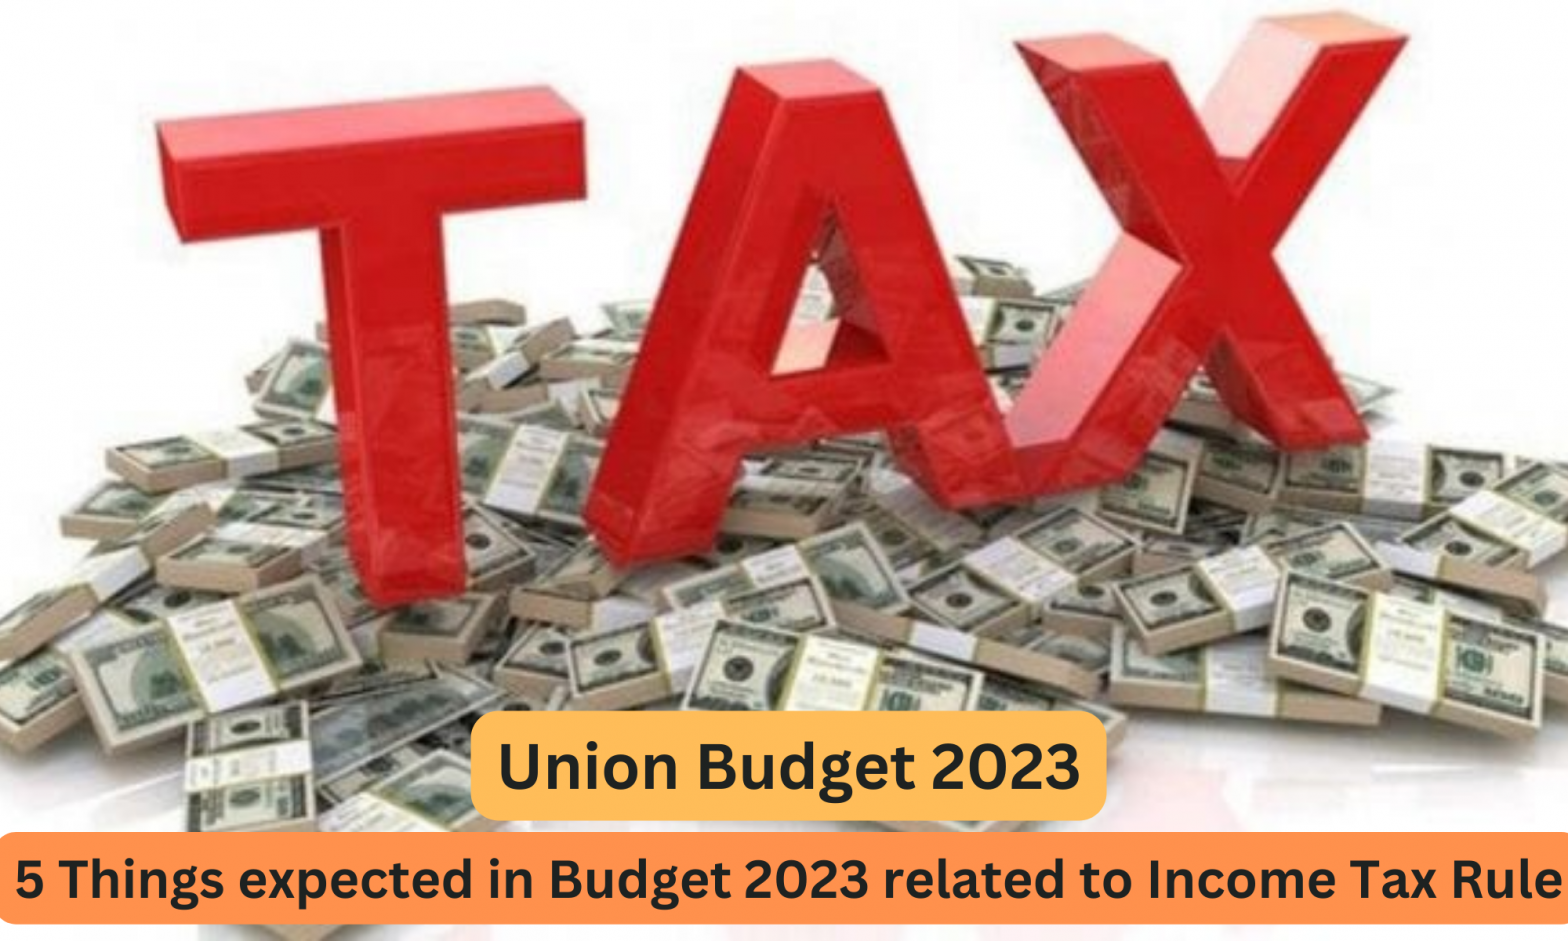 5 Things expected in Budget 2023 related to Income Tax Rule